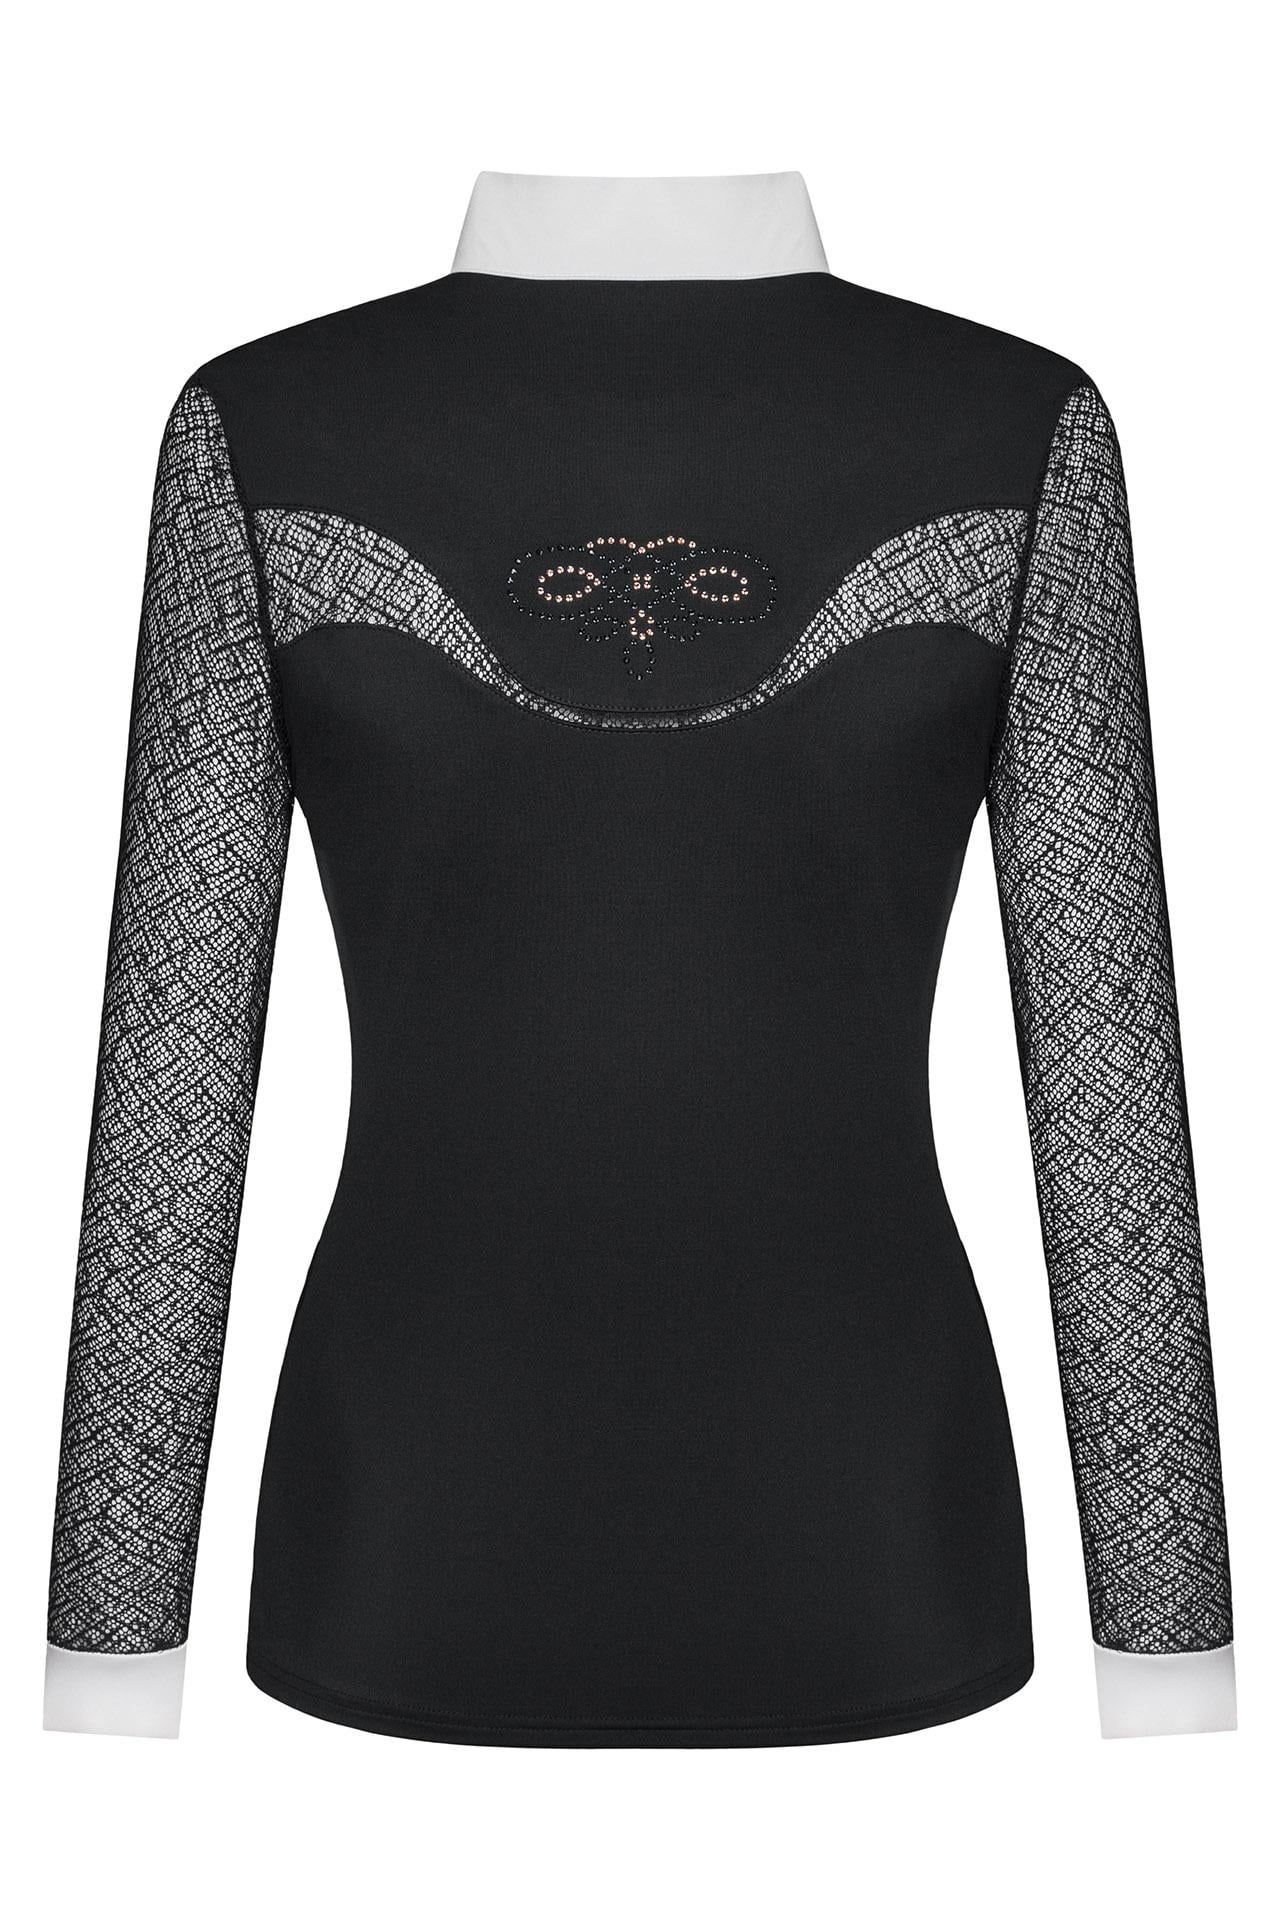 Fair Play Cecile Rose Gold Competition Shirt Longsleeve - The Connected ...